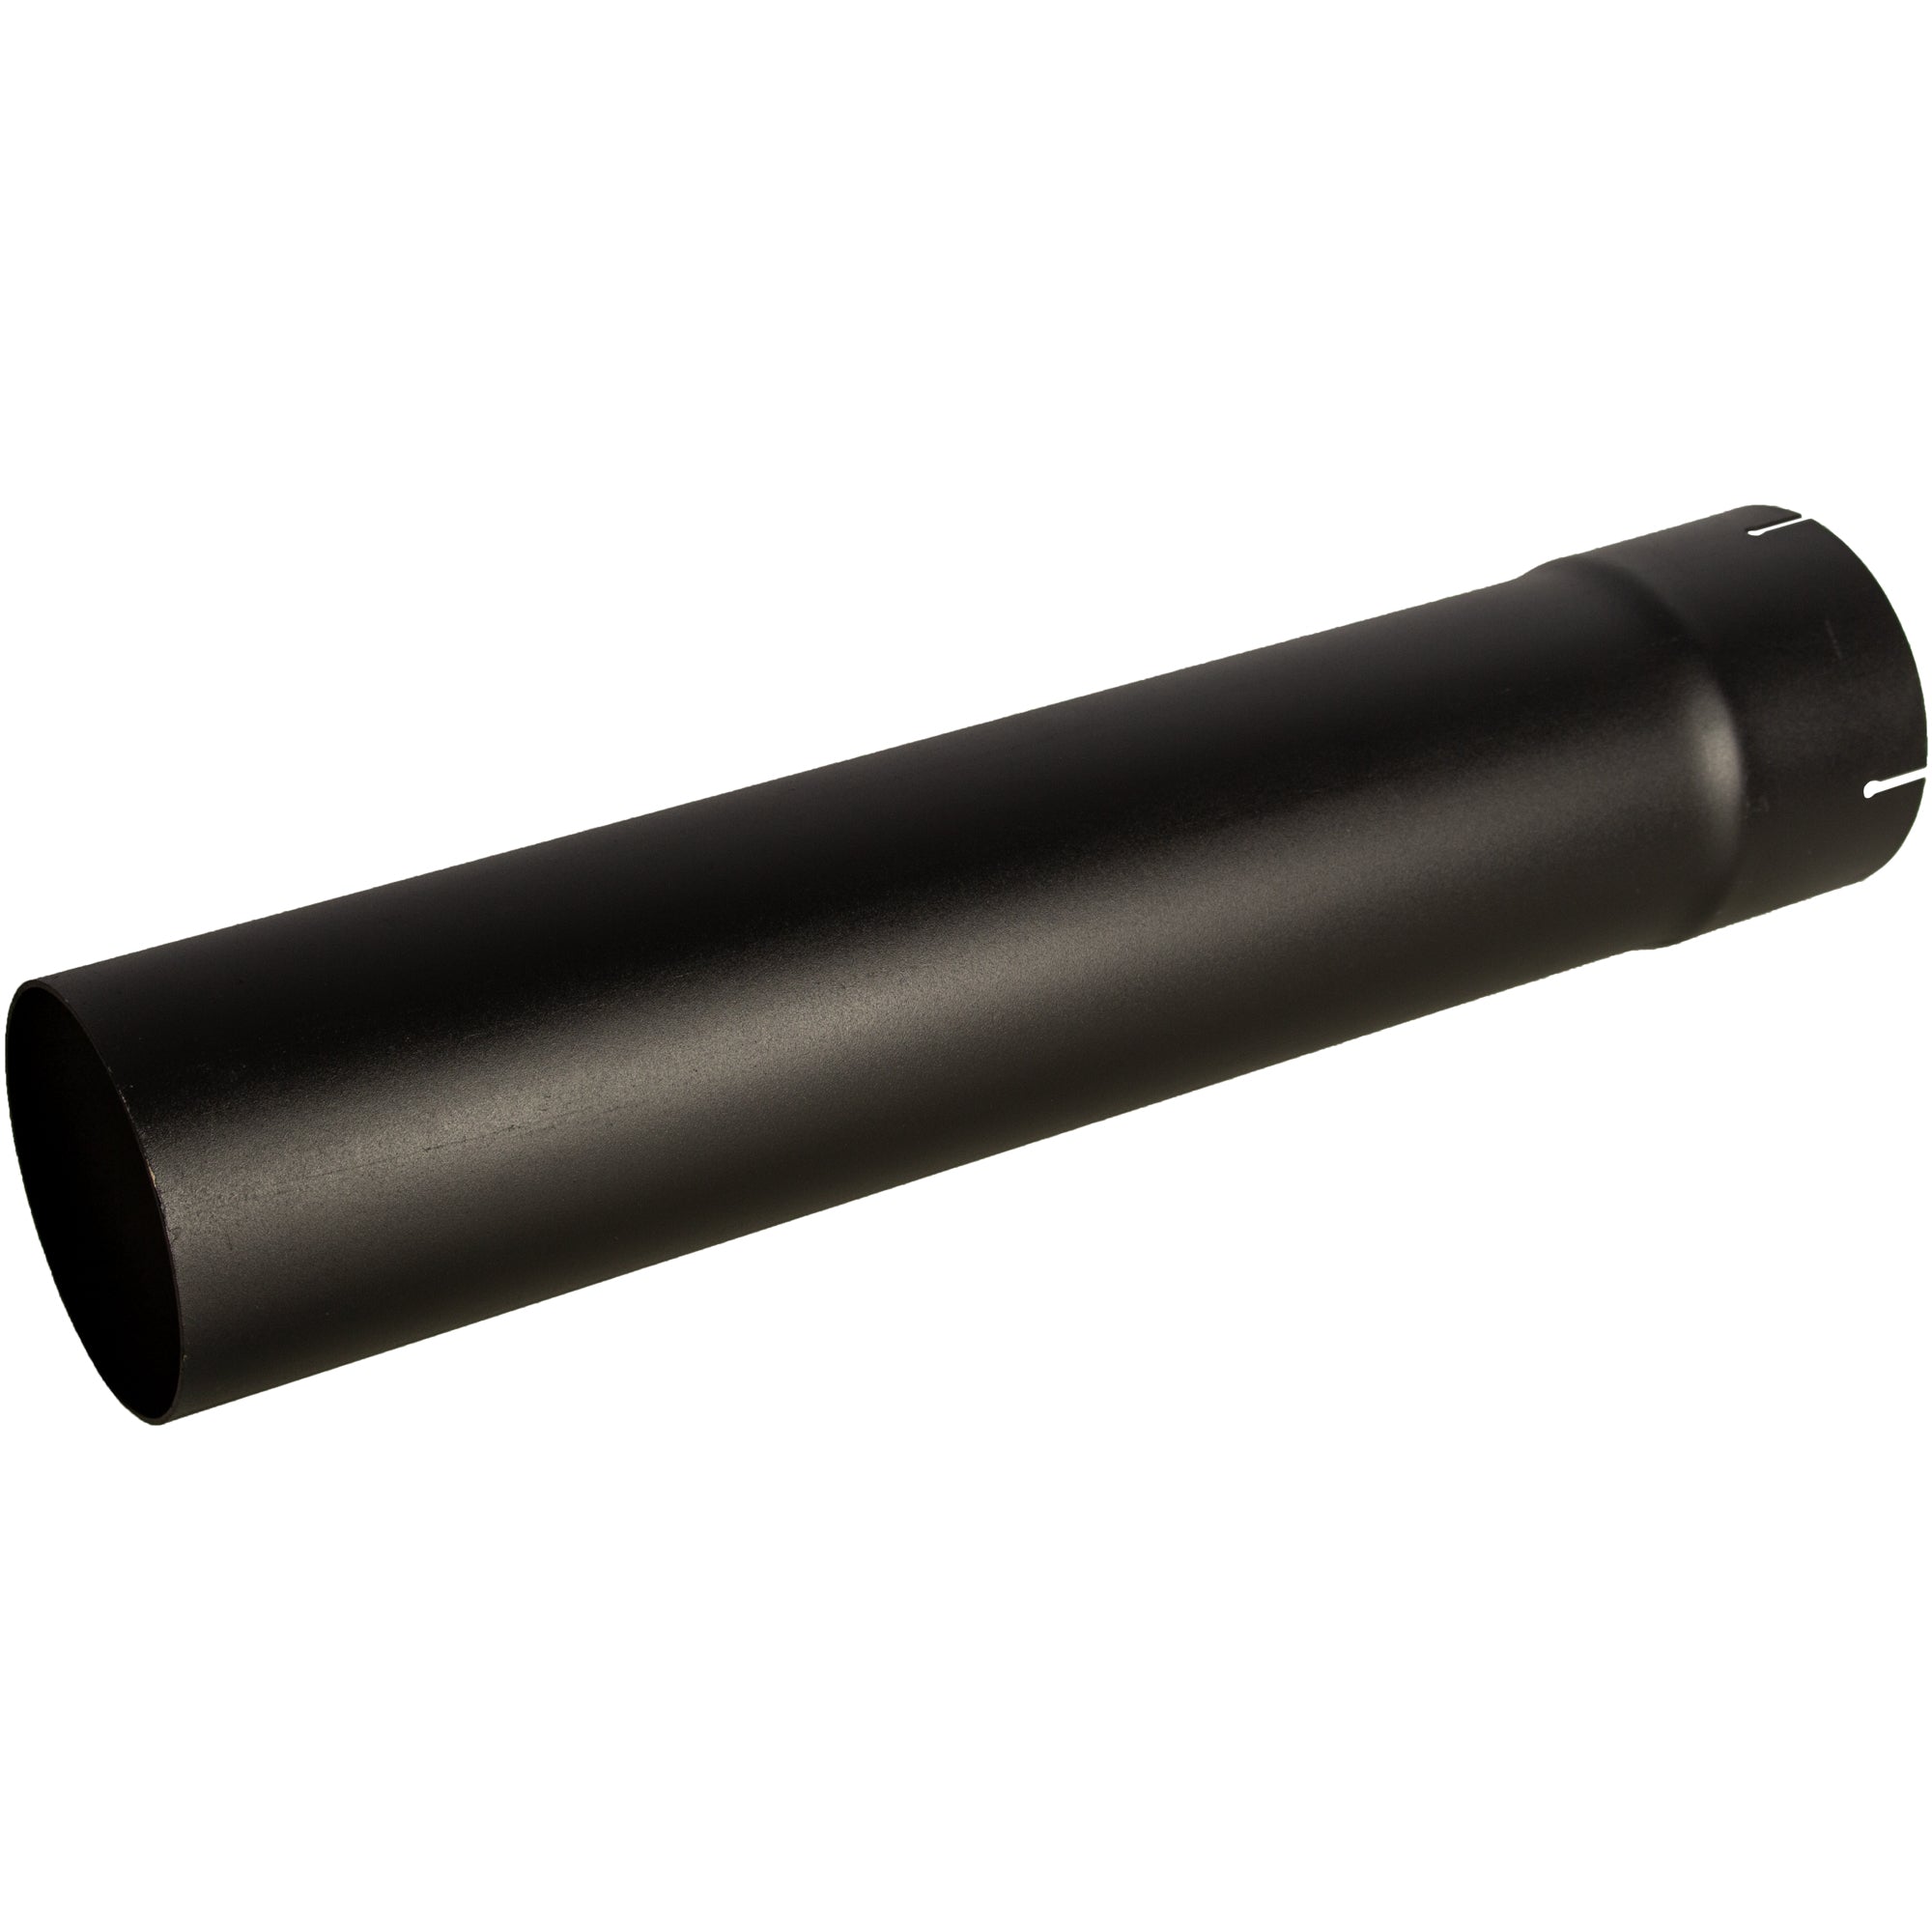 Exhaust Stack Pipe Replacement for UNIVERSAL - 5" x 24" Straight Black